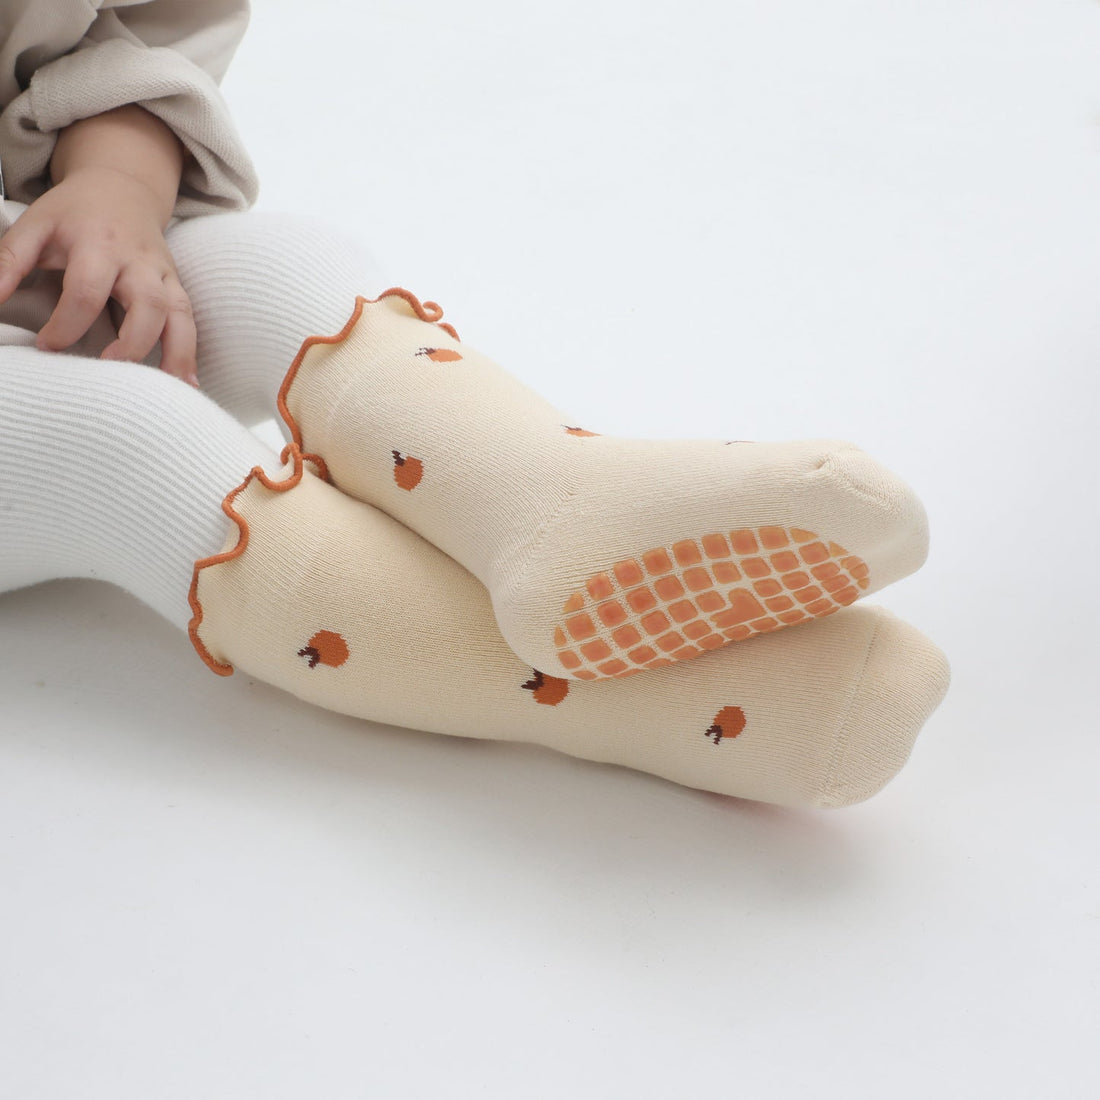 How to ensure grip socks are comfortable for babies all day? –  LittleYogaSocks